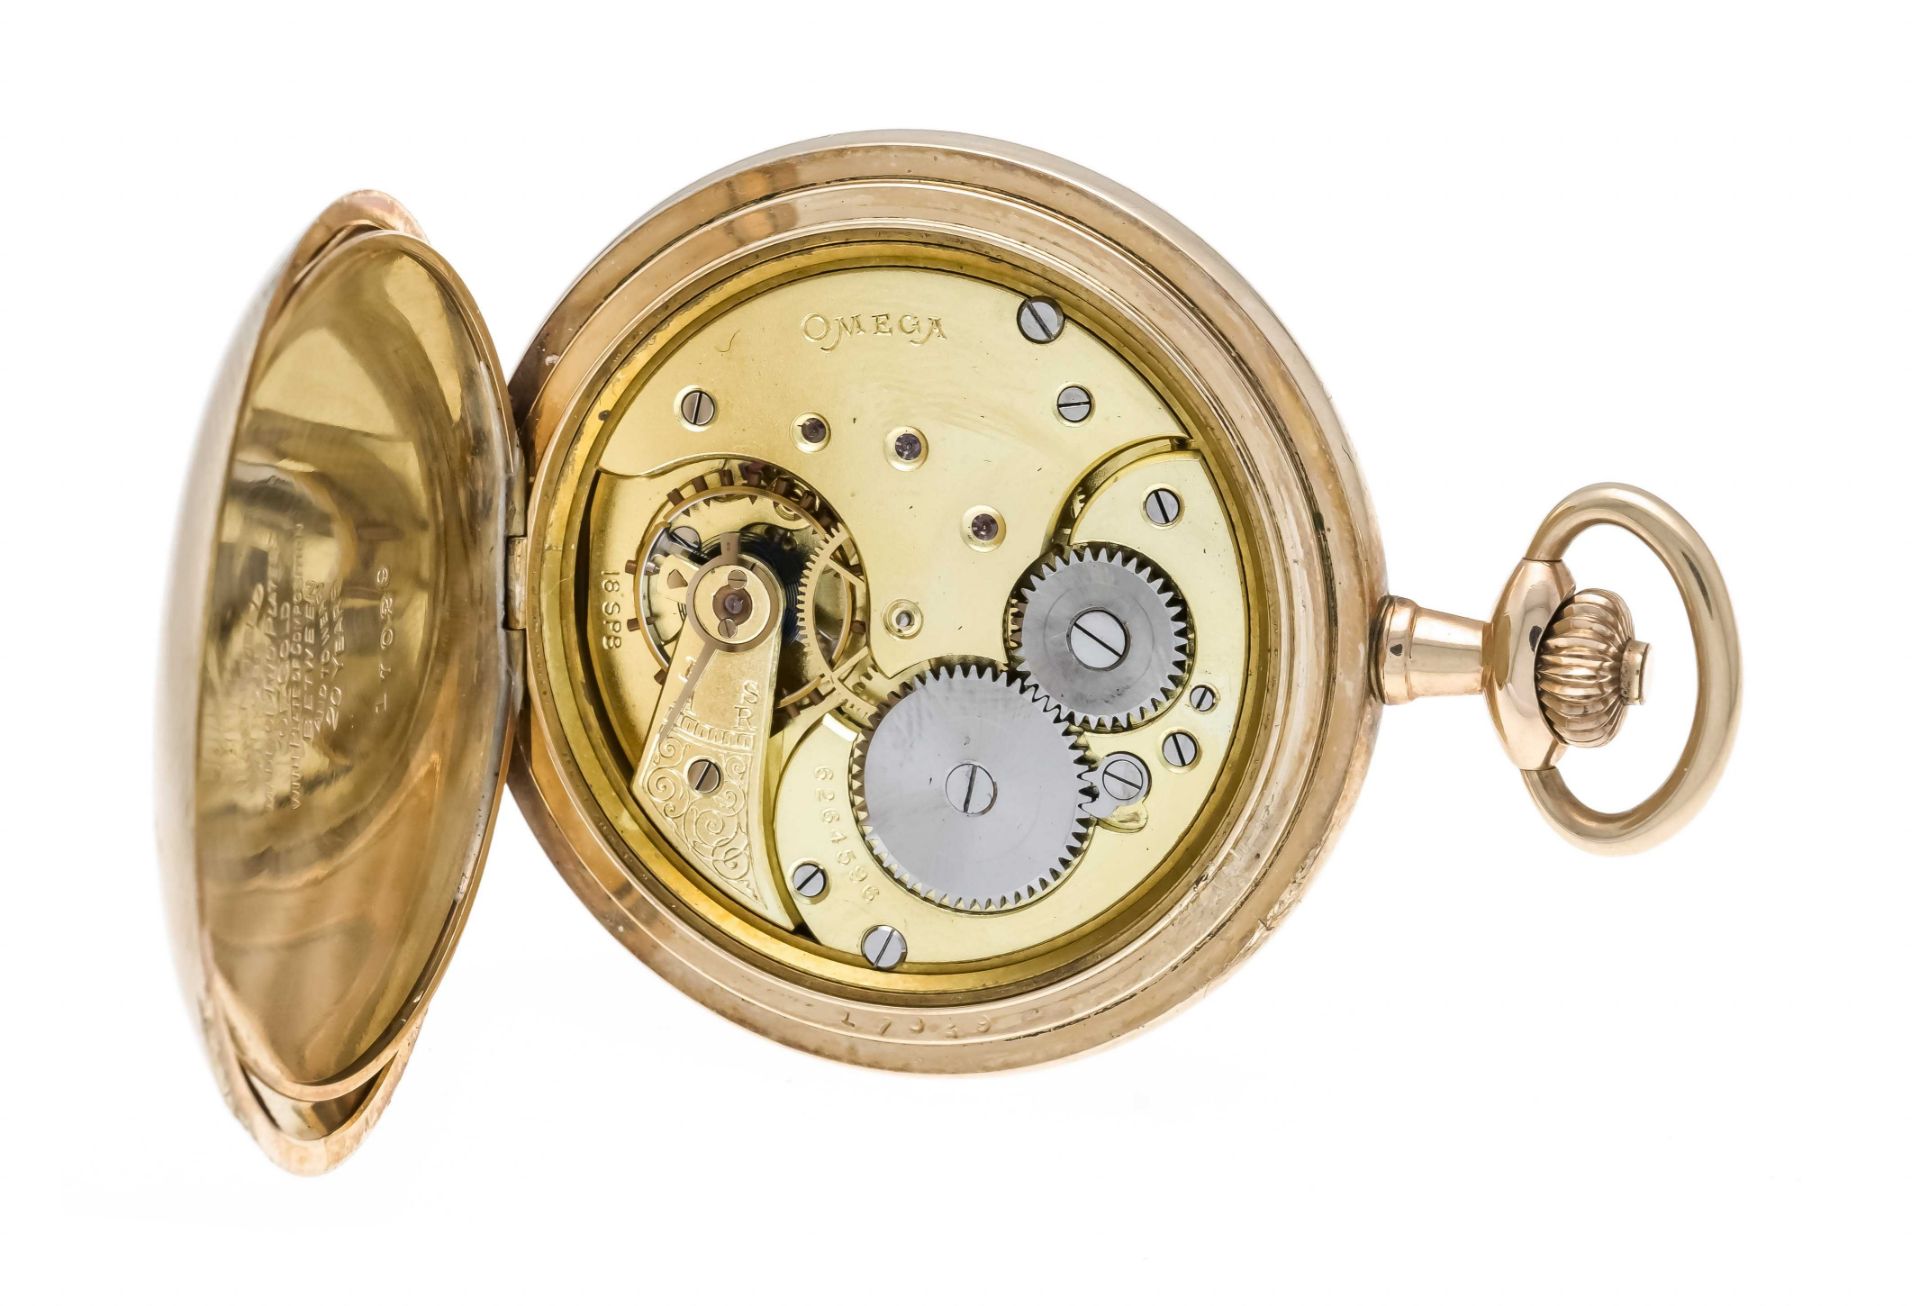 Omega gentleman's pocket watch, circa 1890, sprung cover case goldfilled from gold-filled and - Image 2 of 3